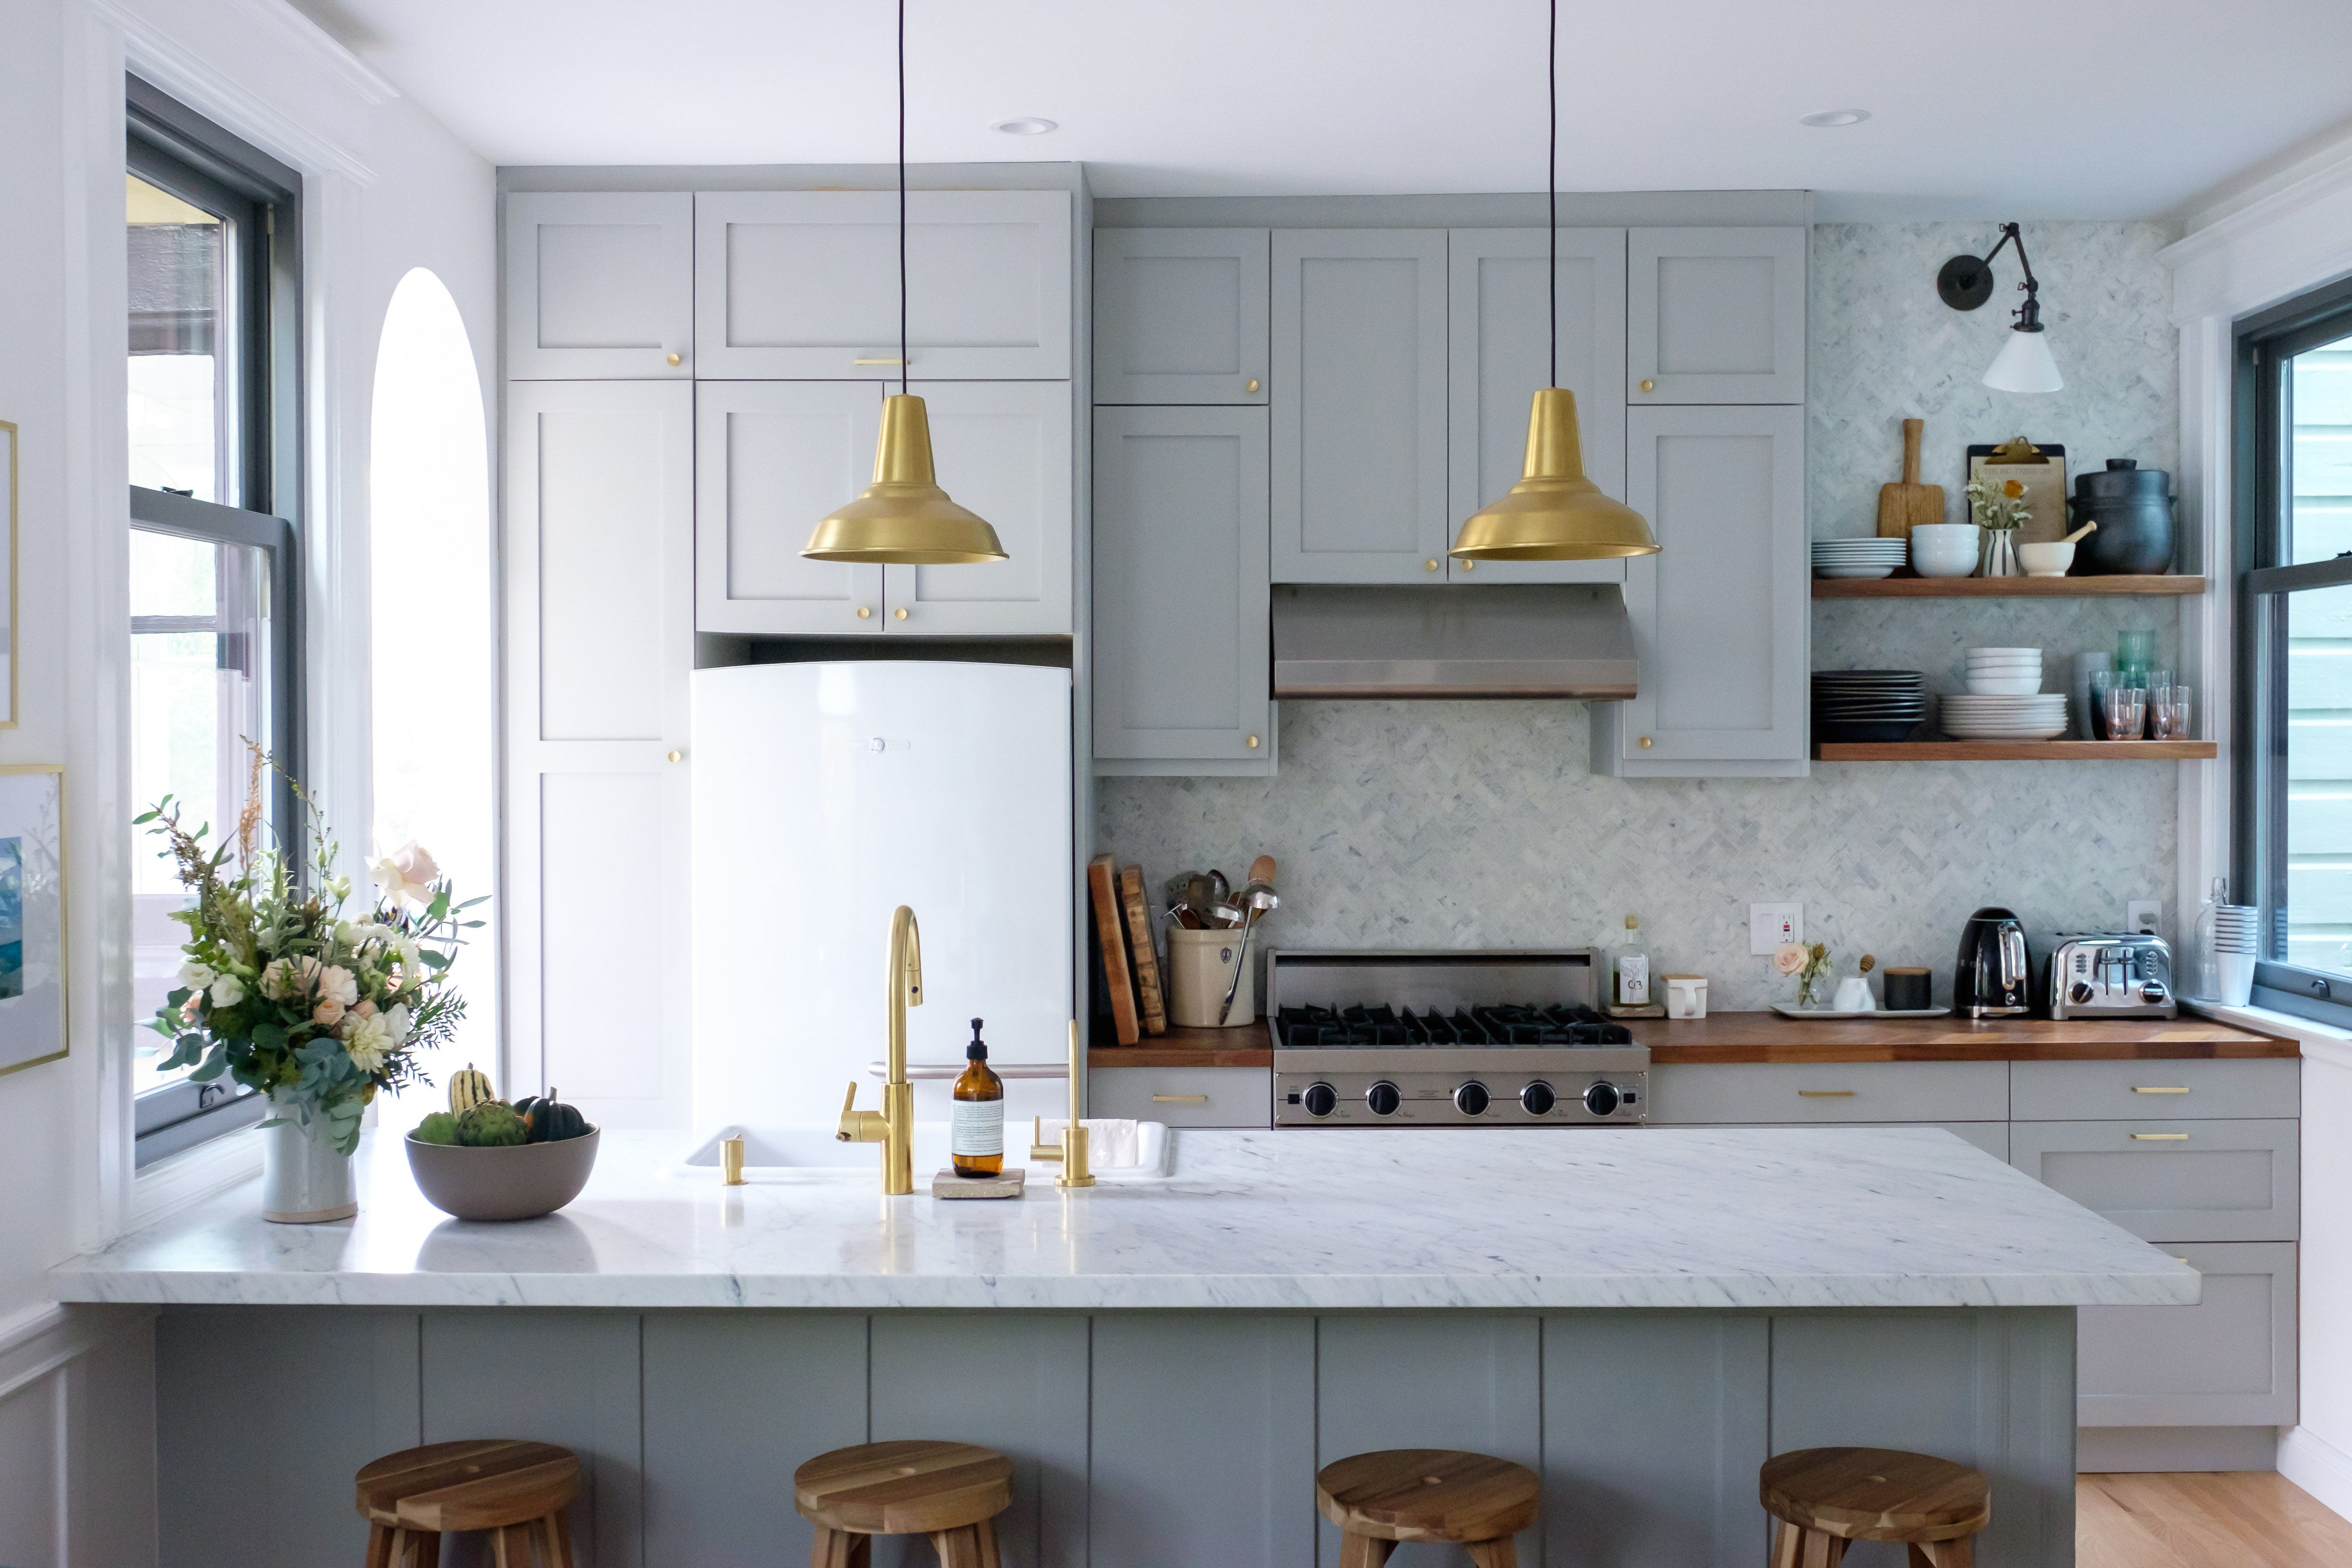 why ikea kitchens are so popular - 4 reasons designers love ikea